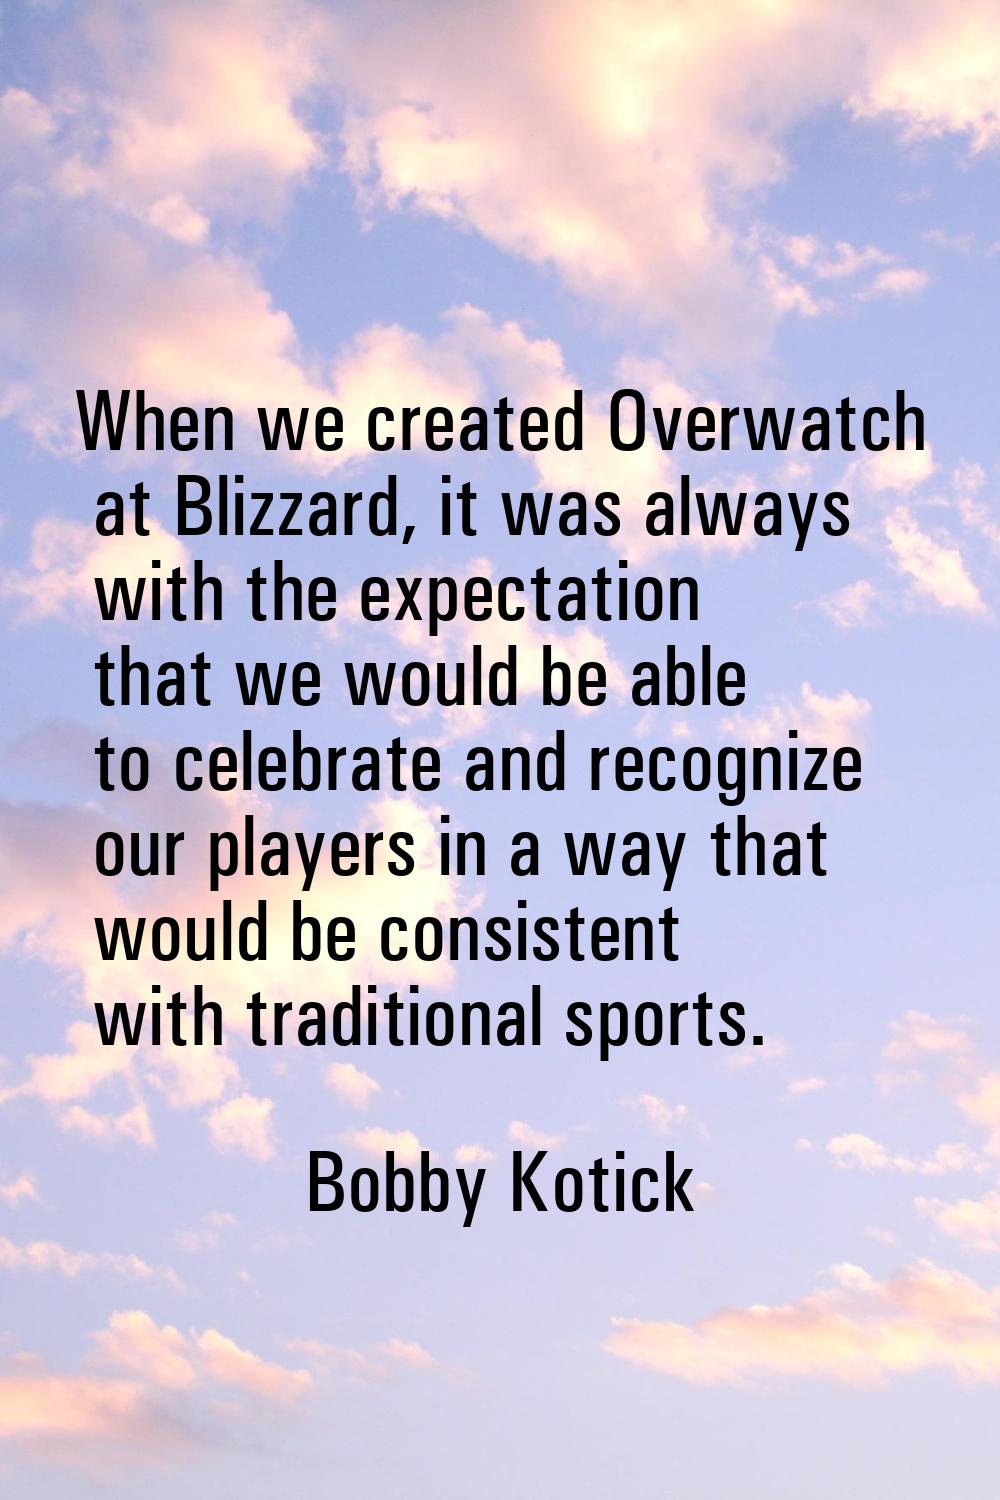 When we created Overwatch at Blizzard, it was always with the expectation that we would be able to 